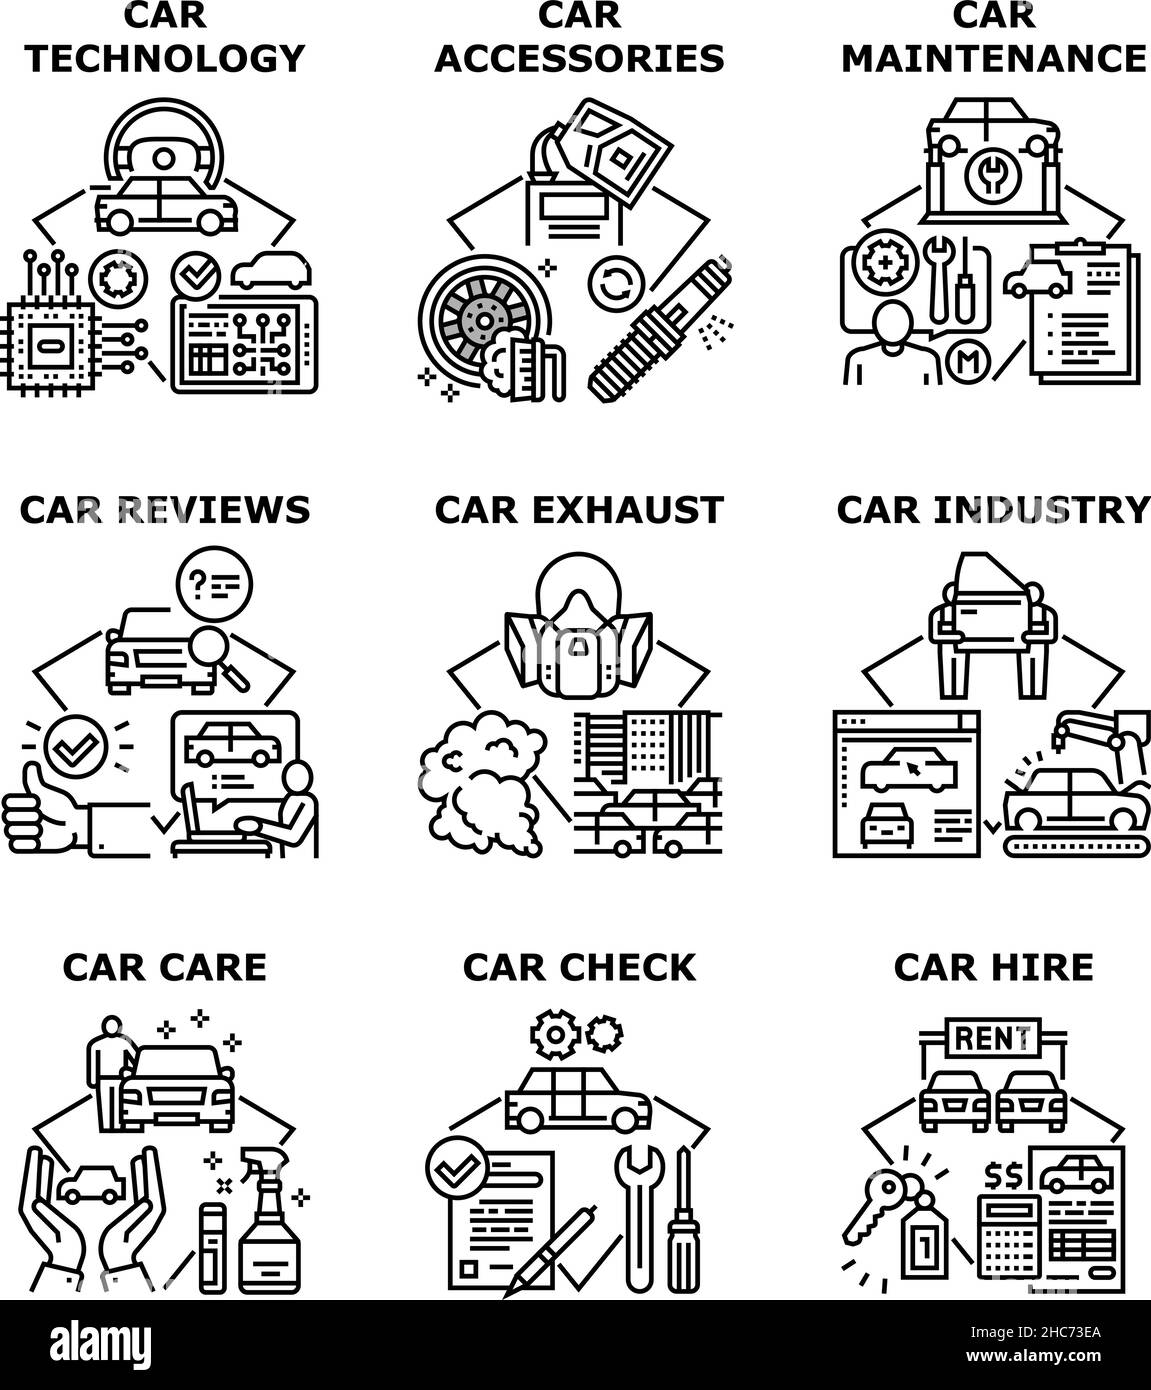 Car Technology Set Icons Vector Illustrations Stock Vector